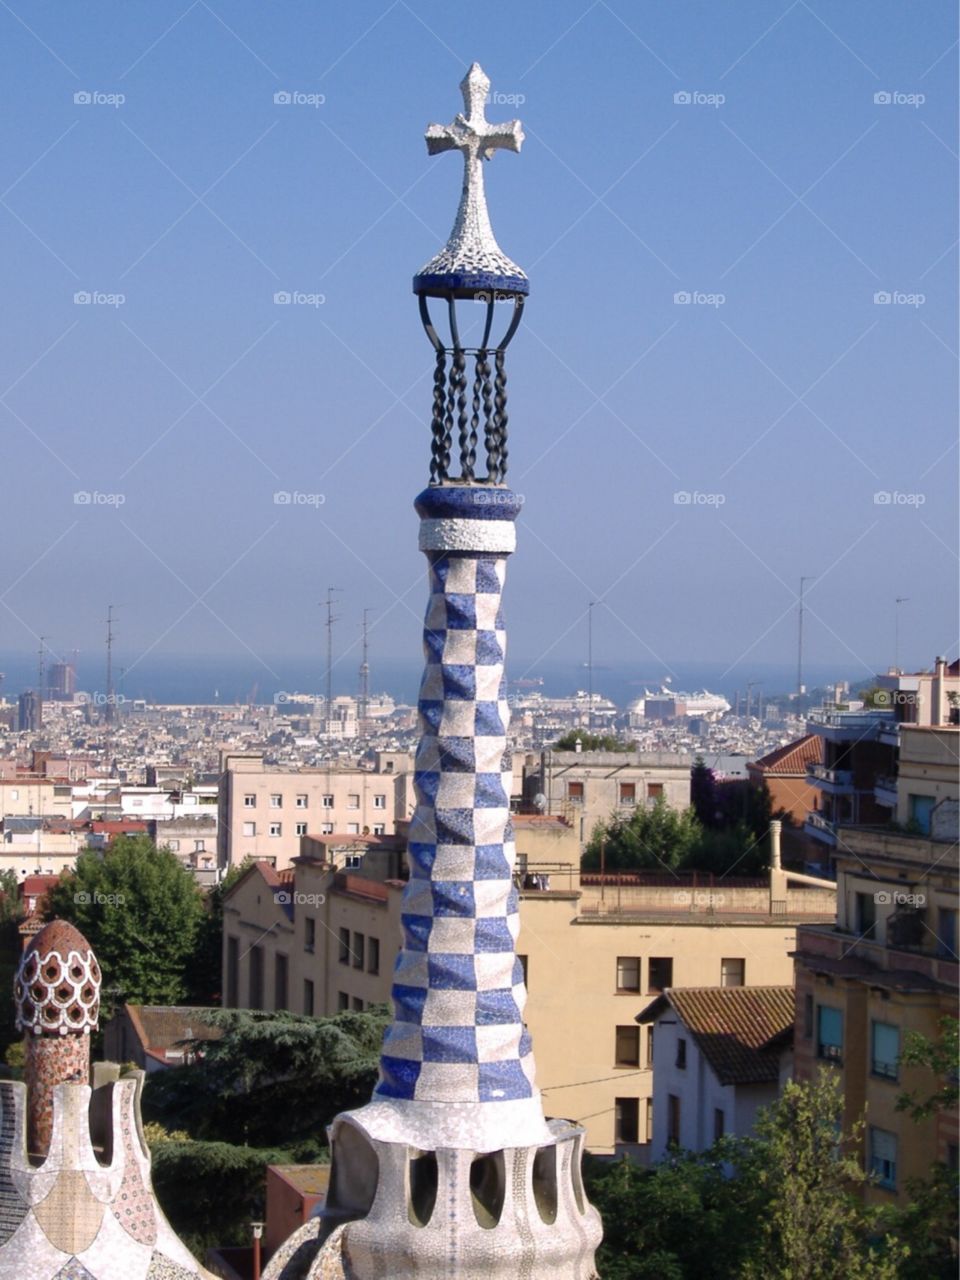 Spire on top of famous building in Park Guell. Barcelona, Spain. 